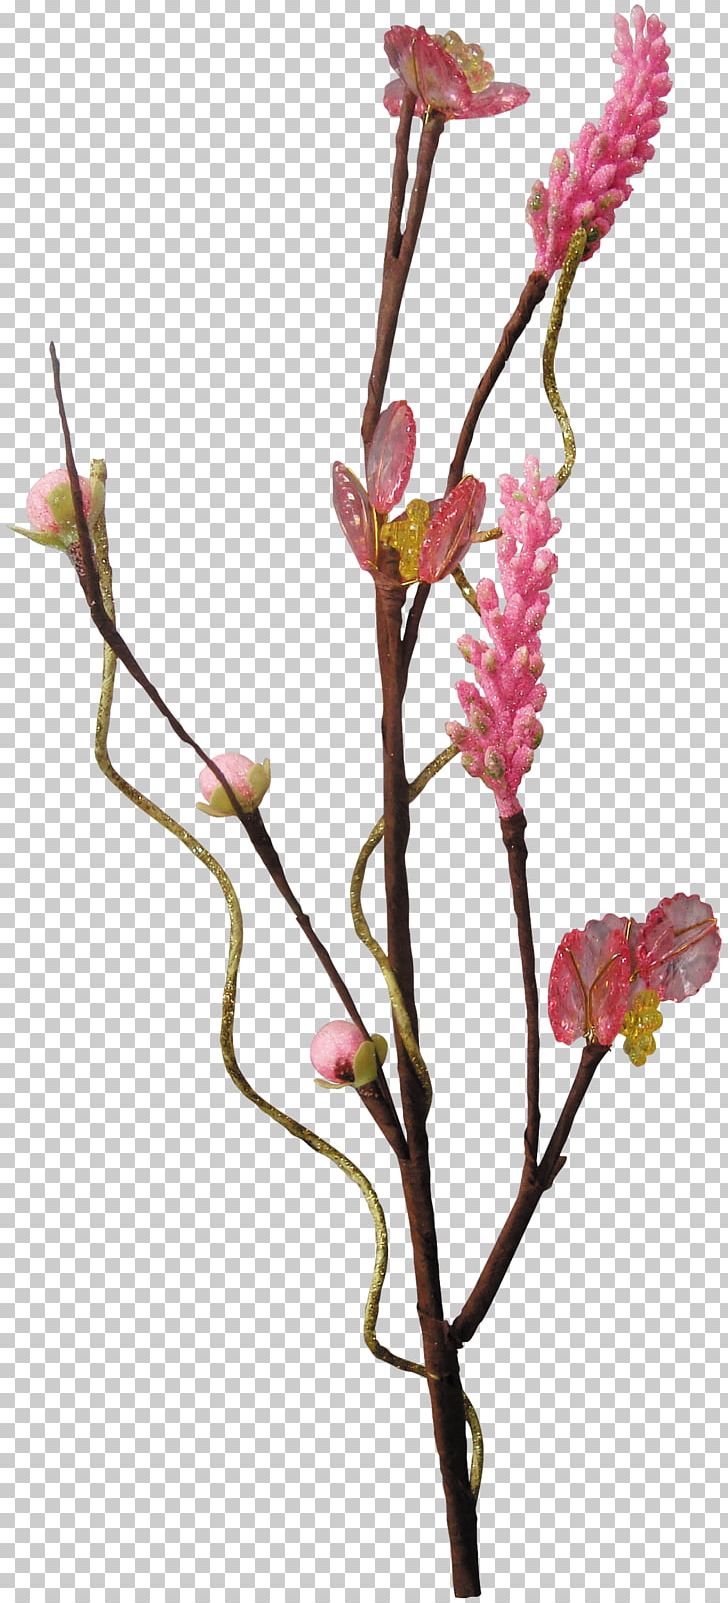 Work Of Art Flower PNG, Clipart, Artwork, Blossom, Branch, Bud, Cherry Blossom Free PNG Download